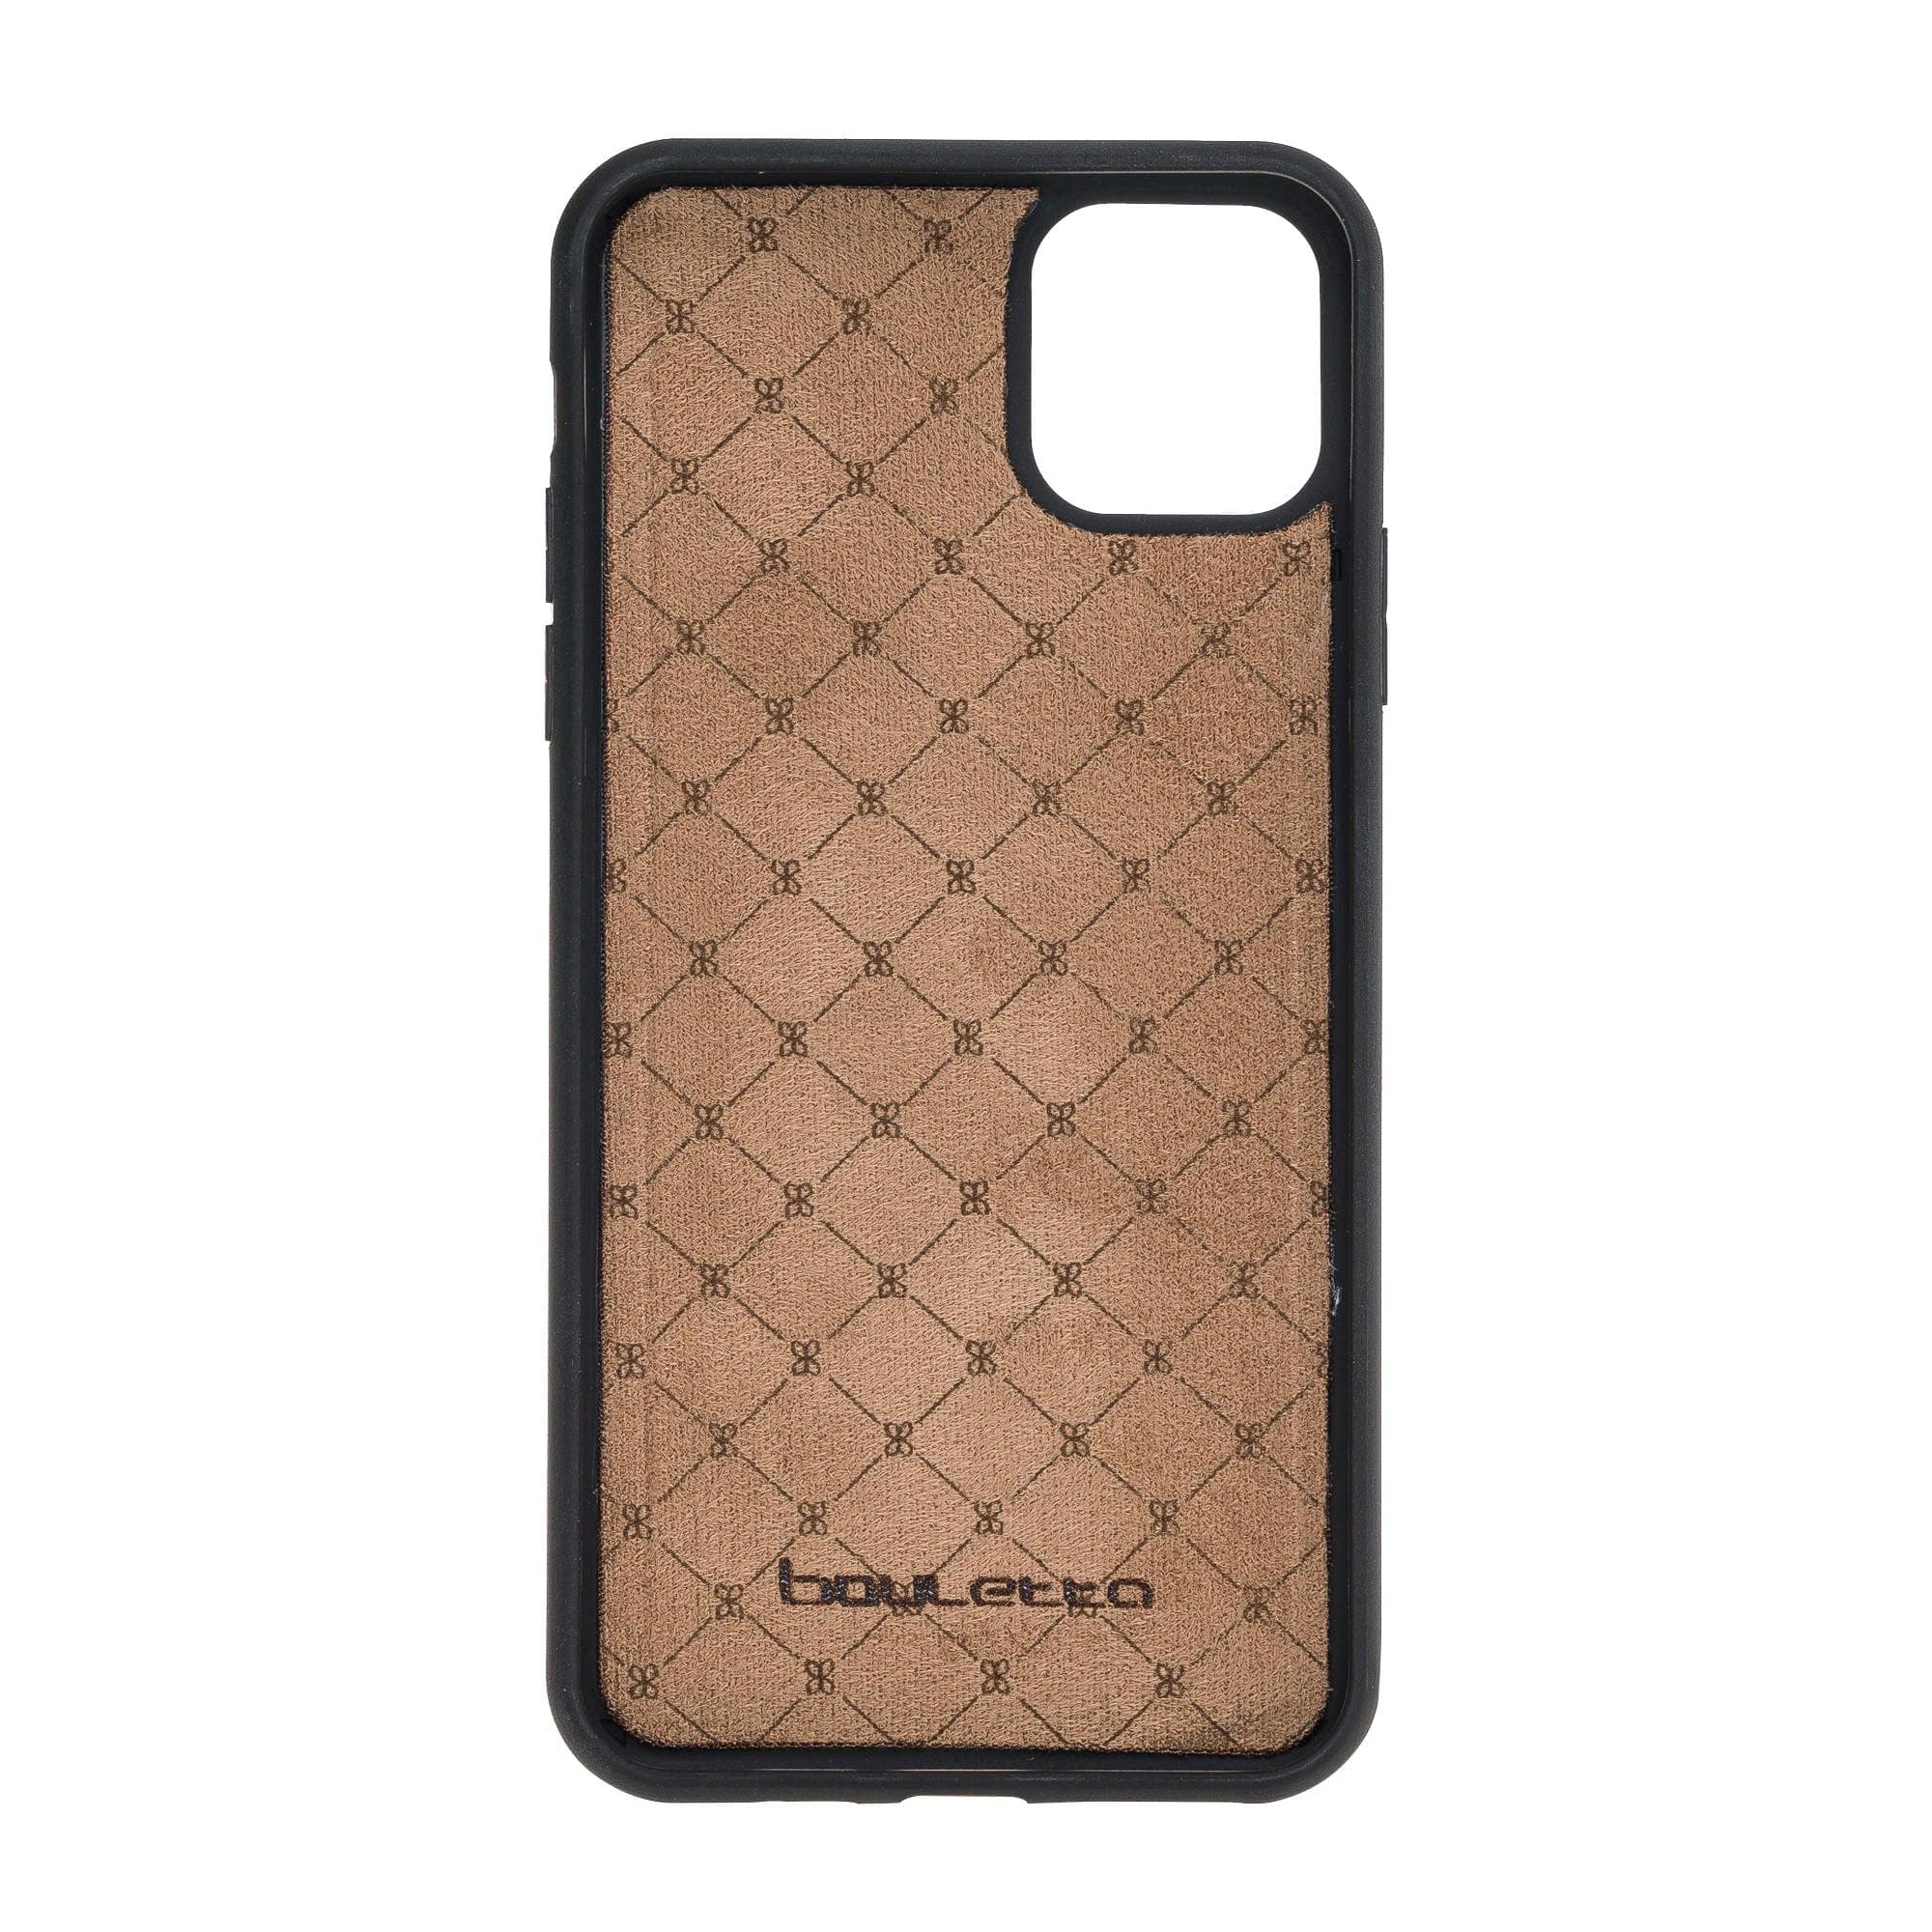 Flex Cover Leather Back Cover Case for Apple iPhone 11 Series Bouletta LTD